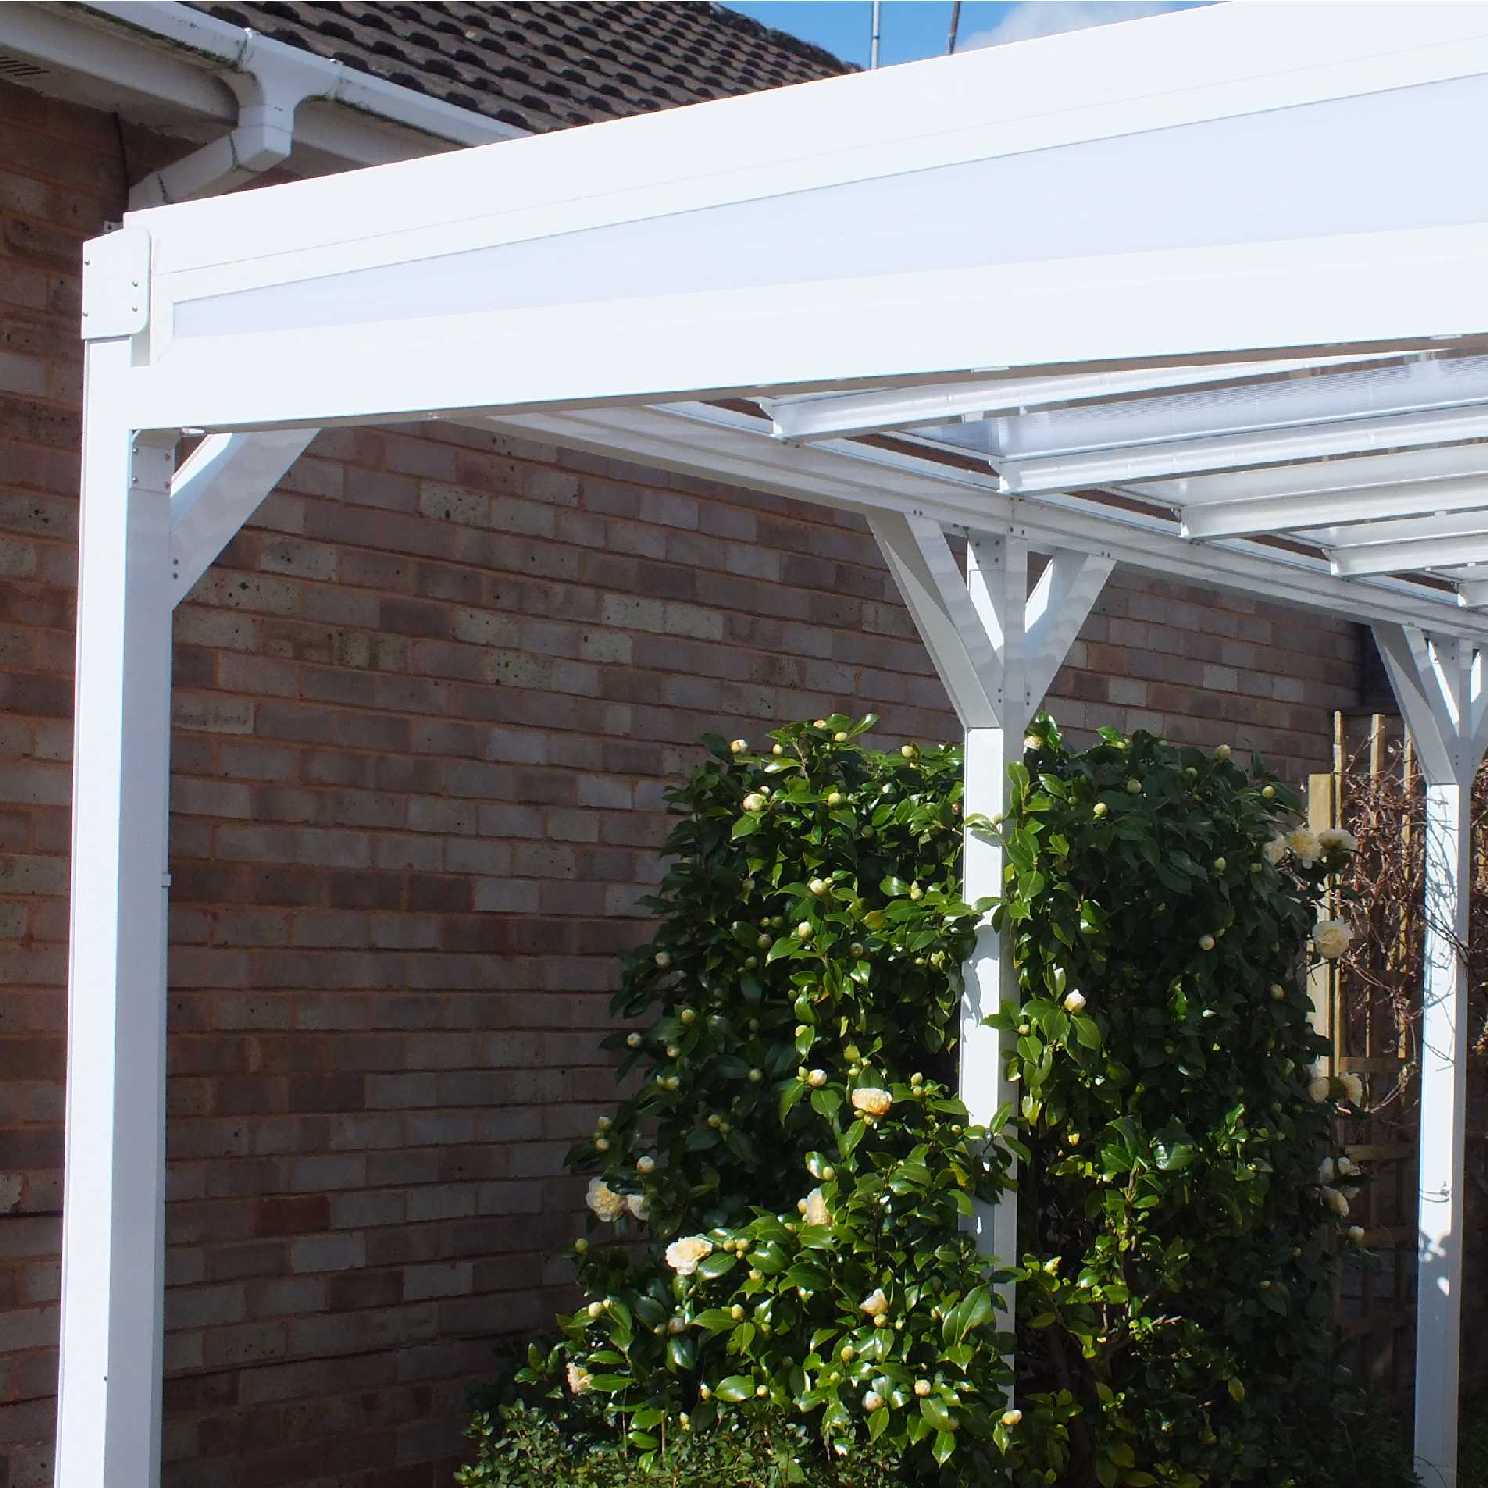 Omega Smart Lean-To Canopy, White with 16mm Polycarbonate Glazing - 3.1m (W) x 3.0m (P), (2) Supporting Posts from Omega Build